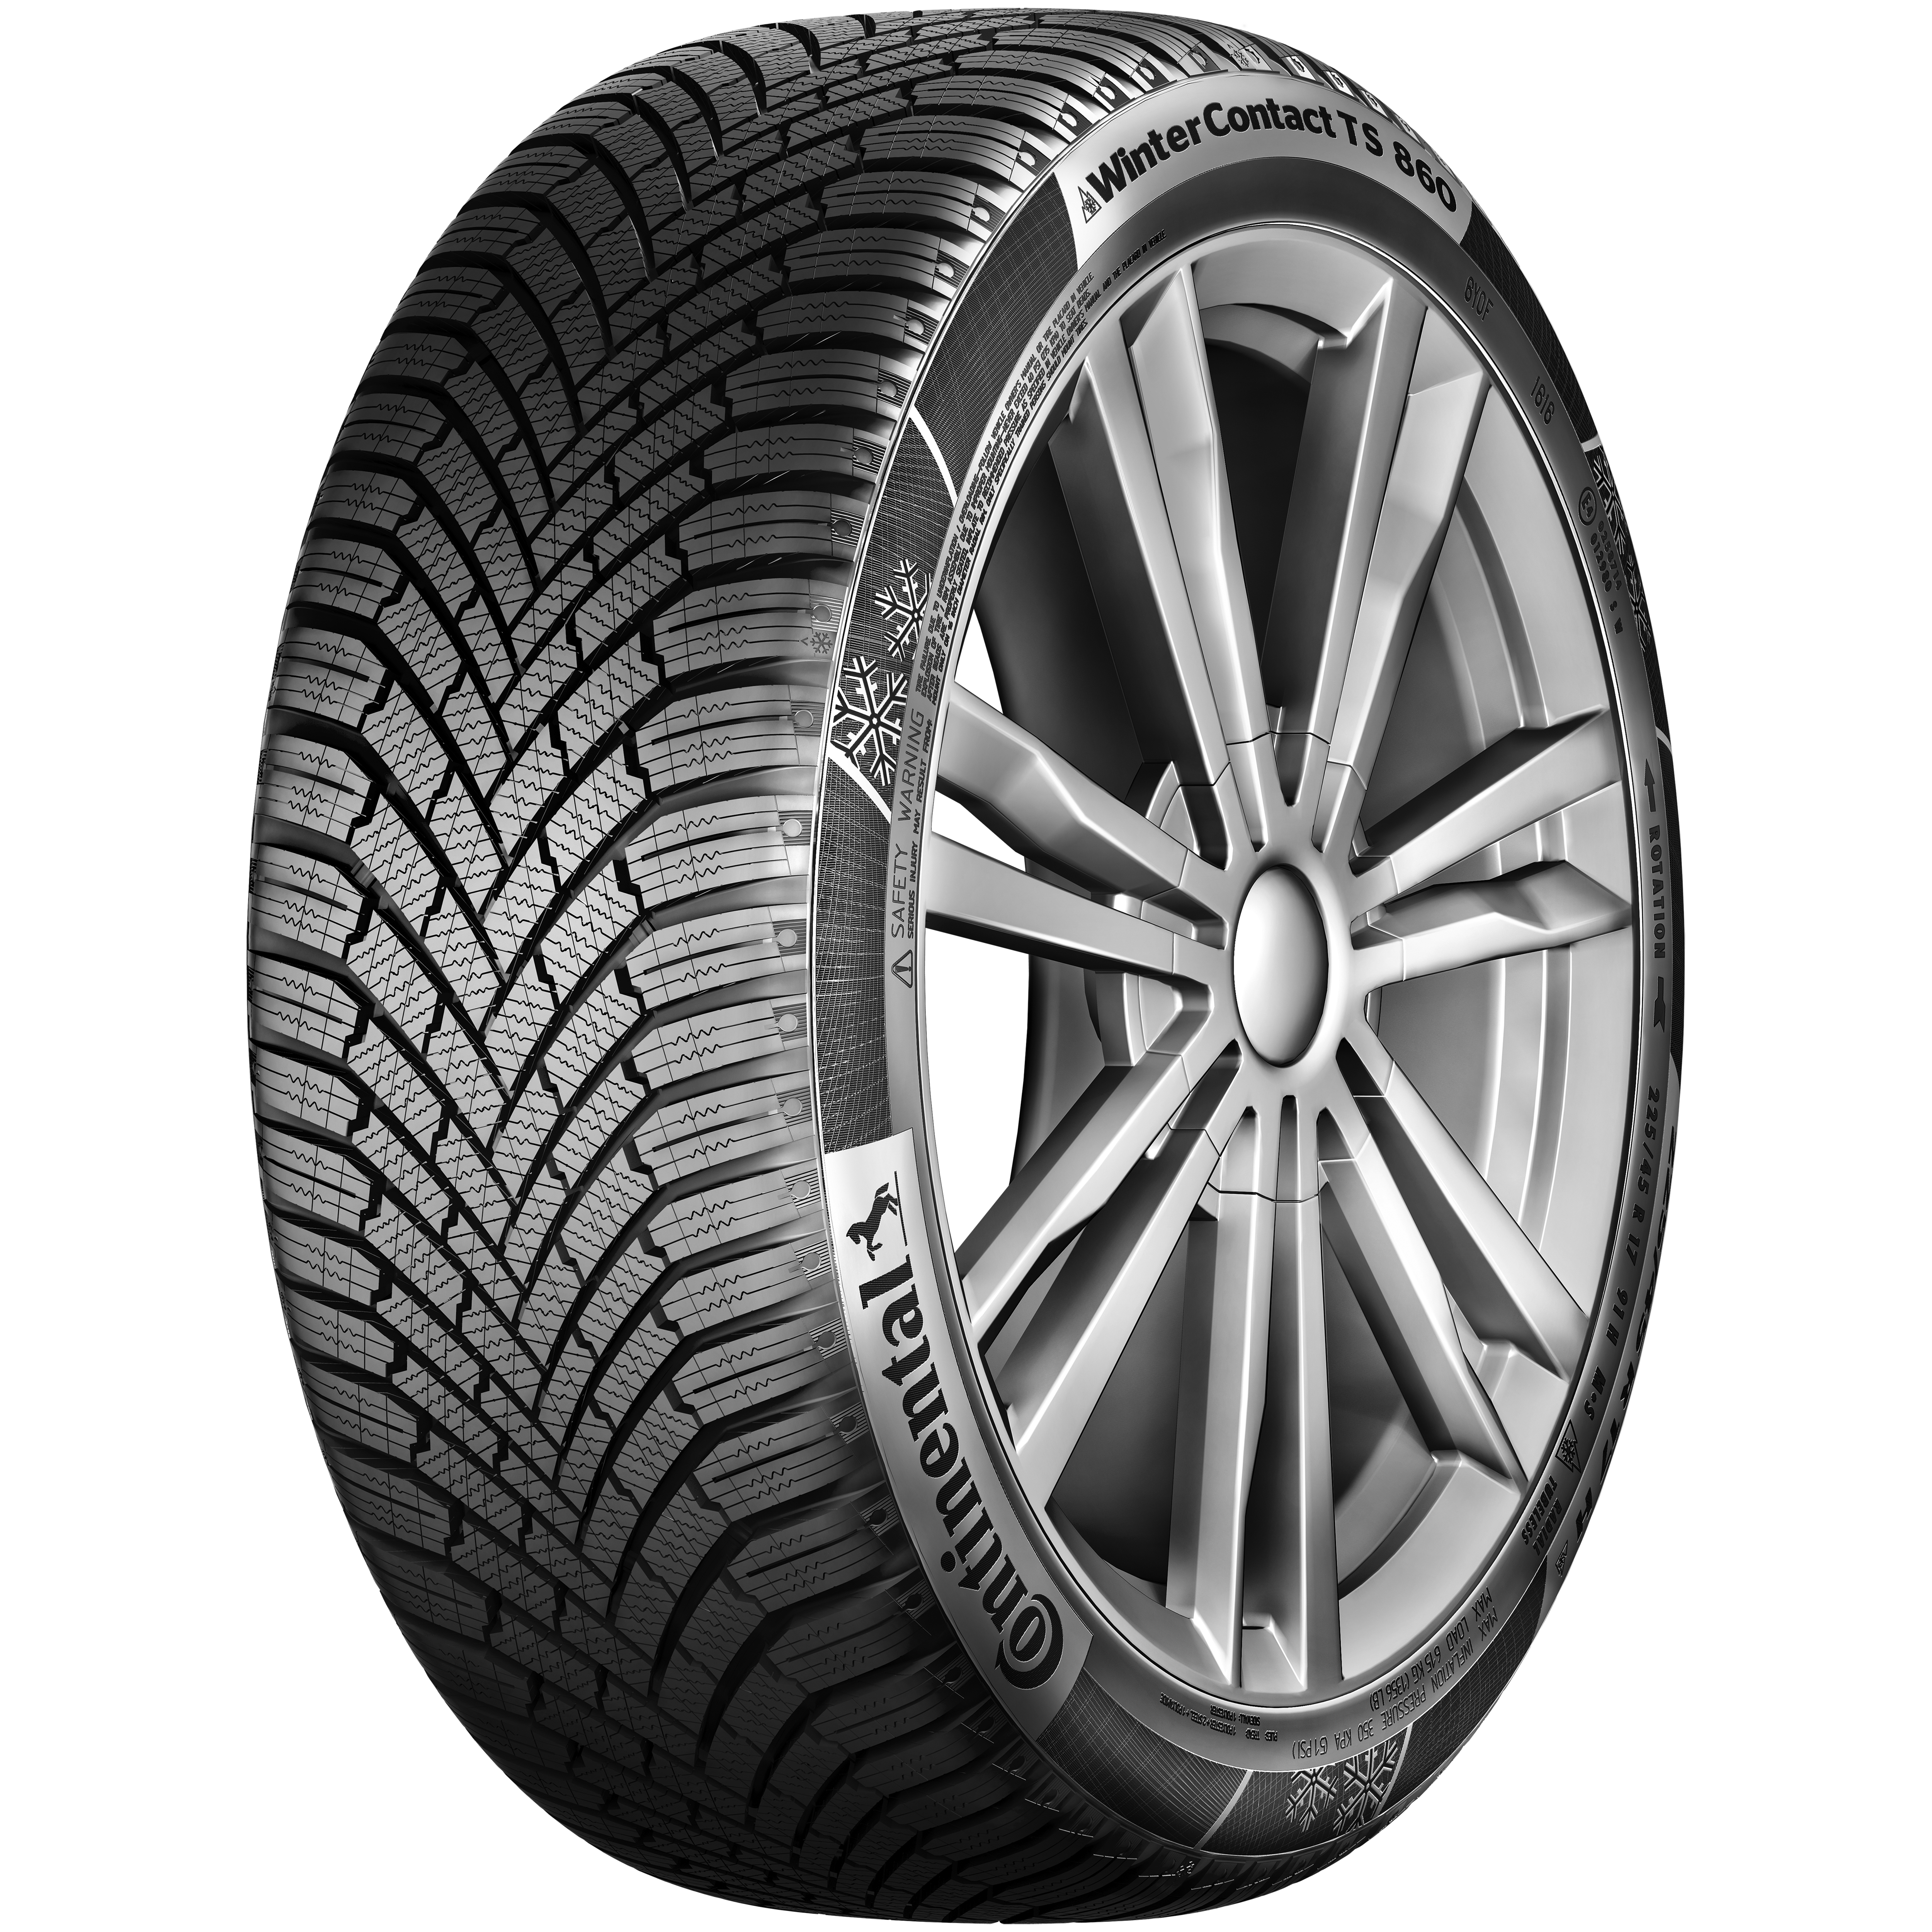 WinterContact TS 860: When you winter, trust just your tires can\'t trust the